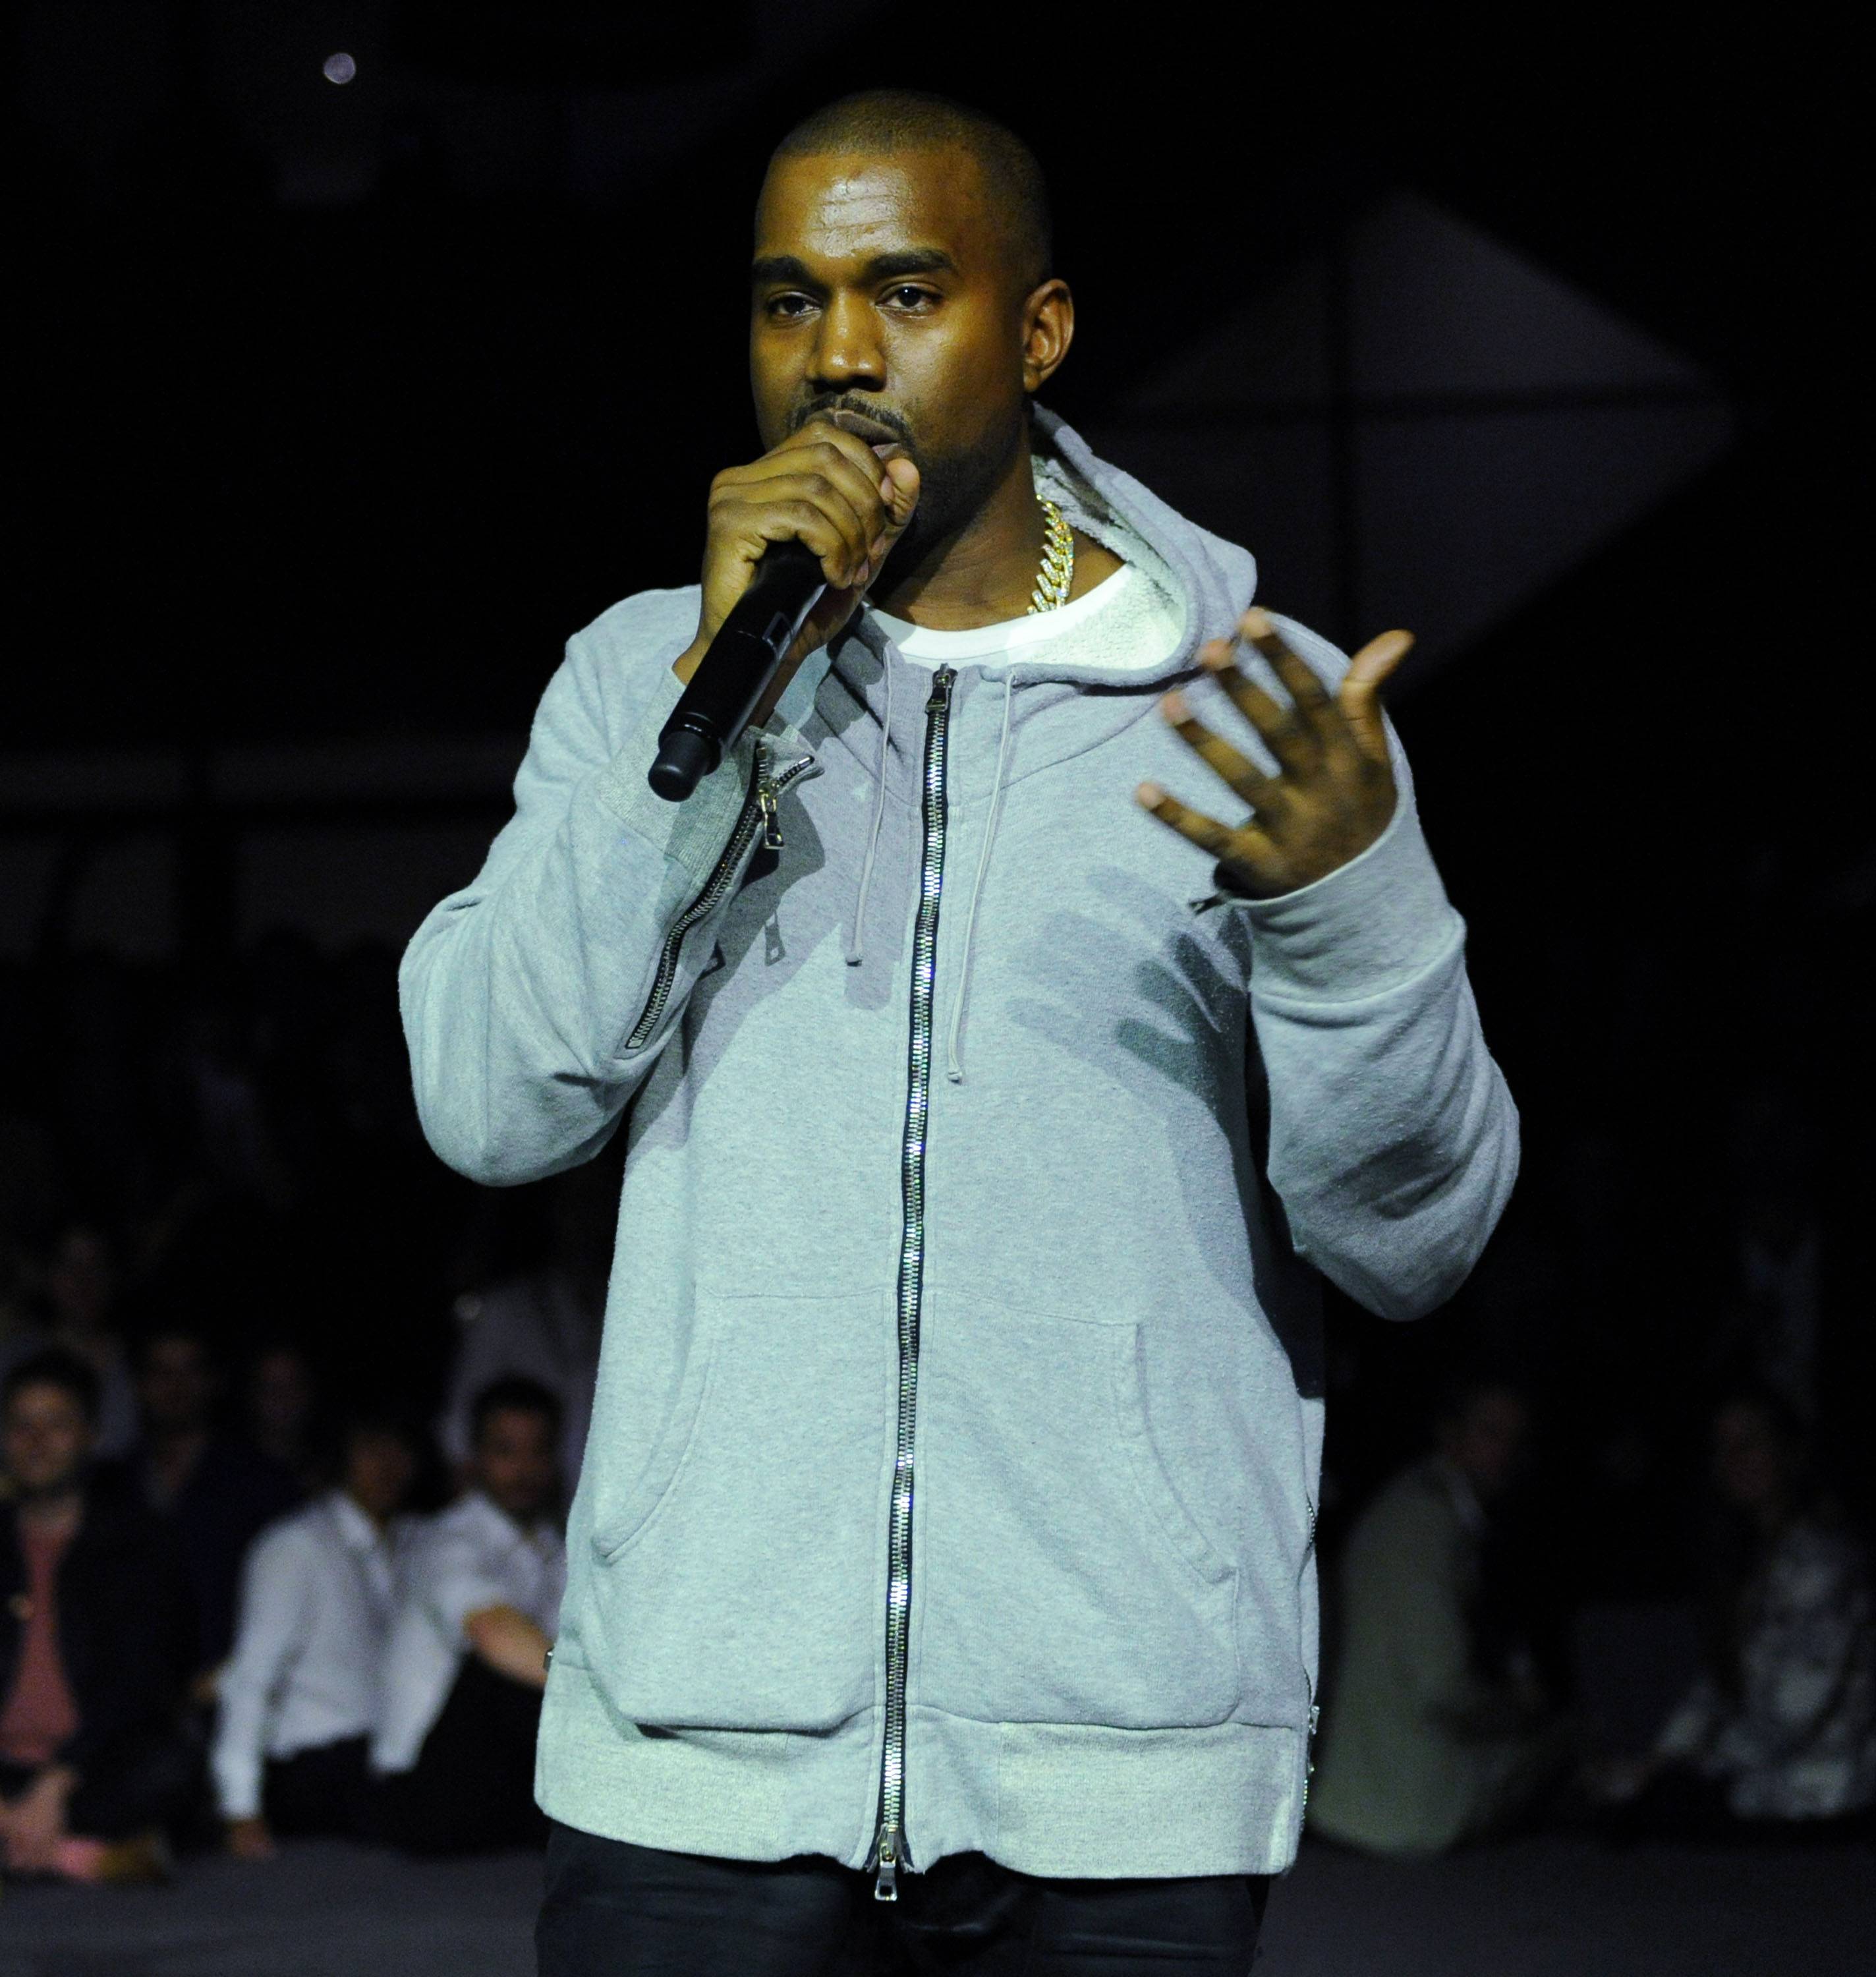 Design Miami Presents Kanye West World Exclusive Listening Party for His New Albulm “Yeezus”